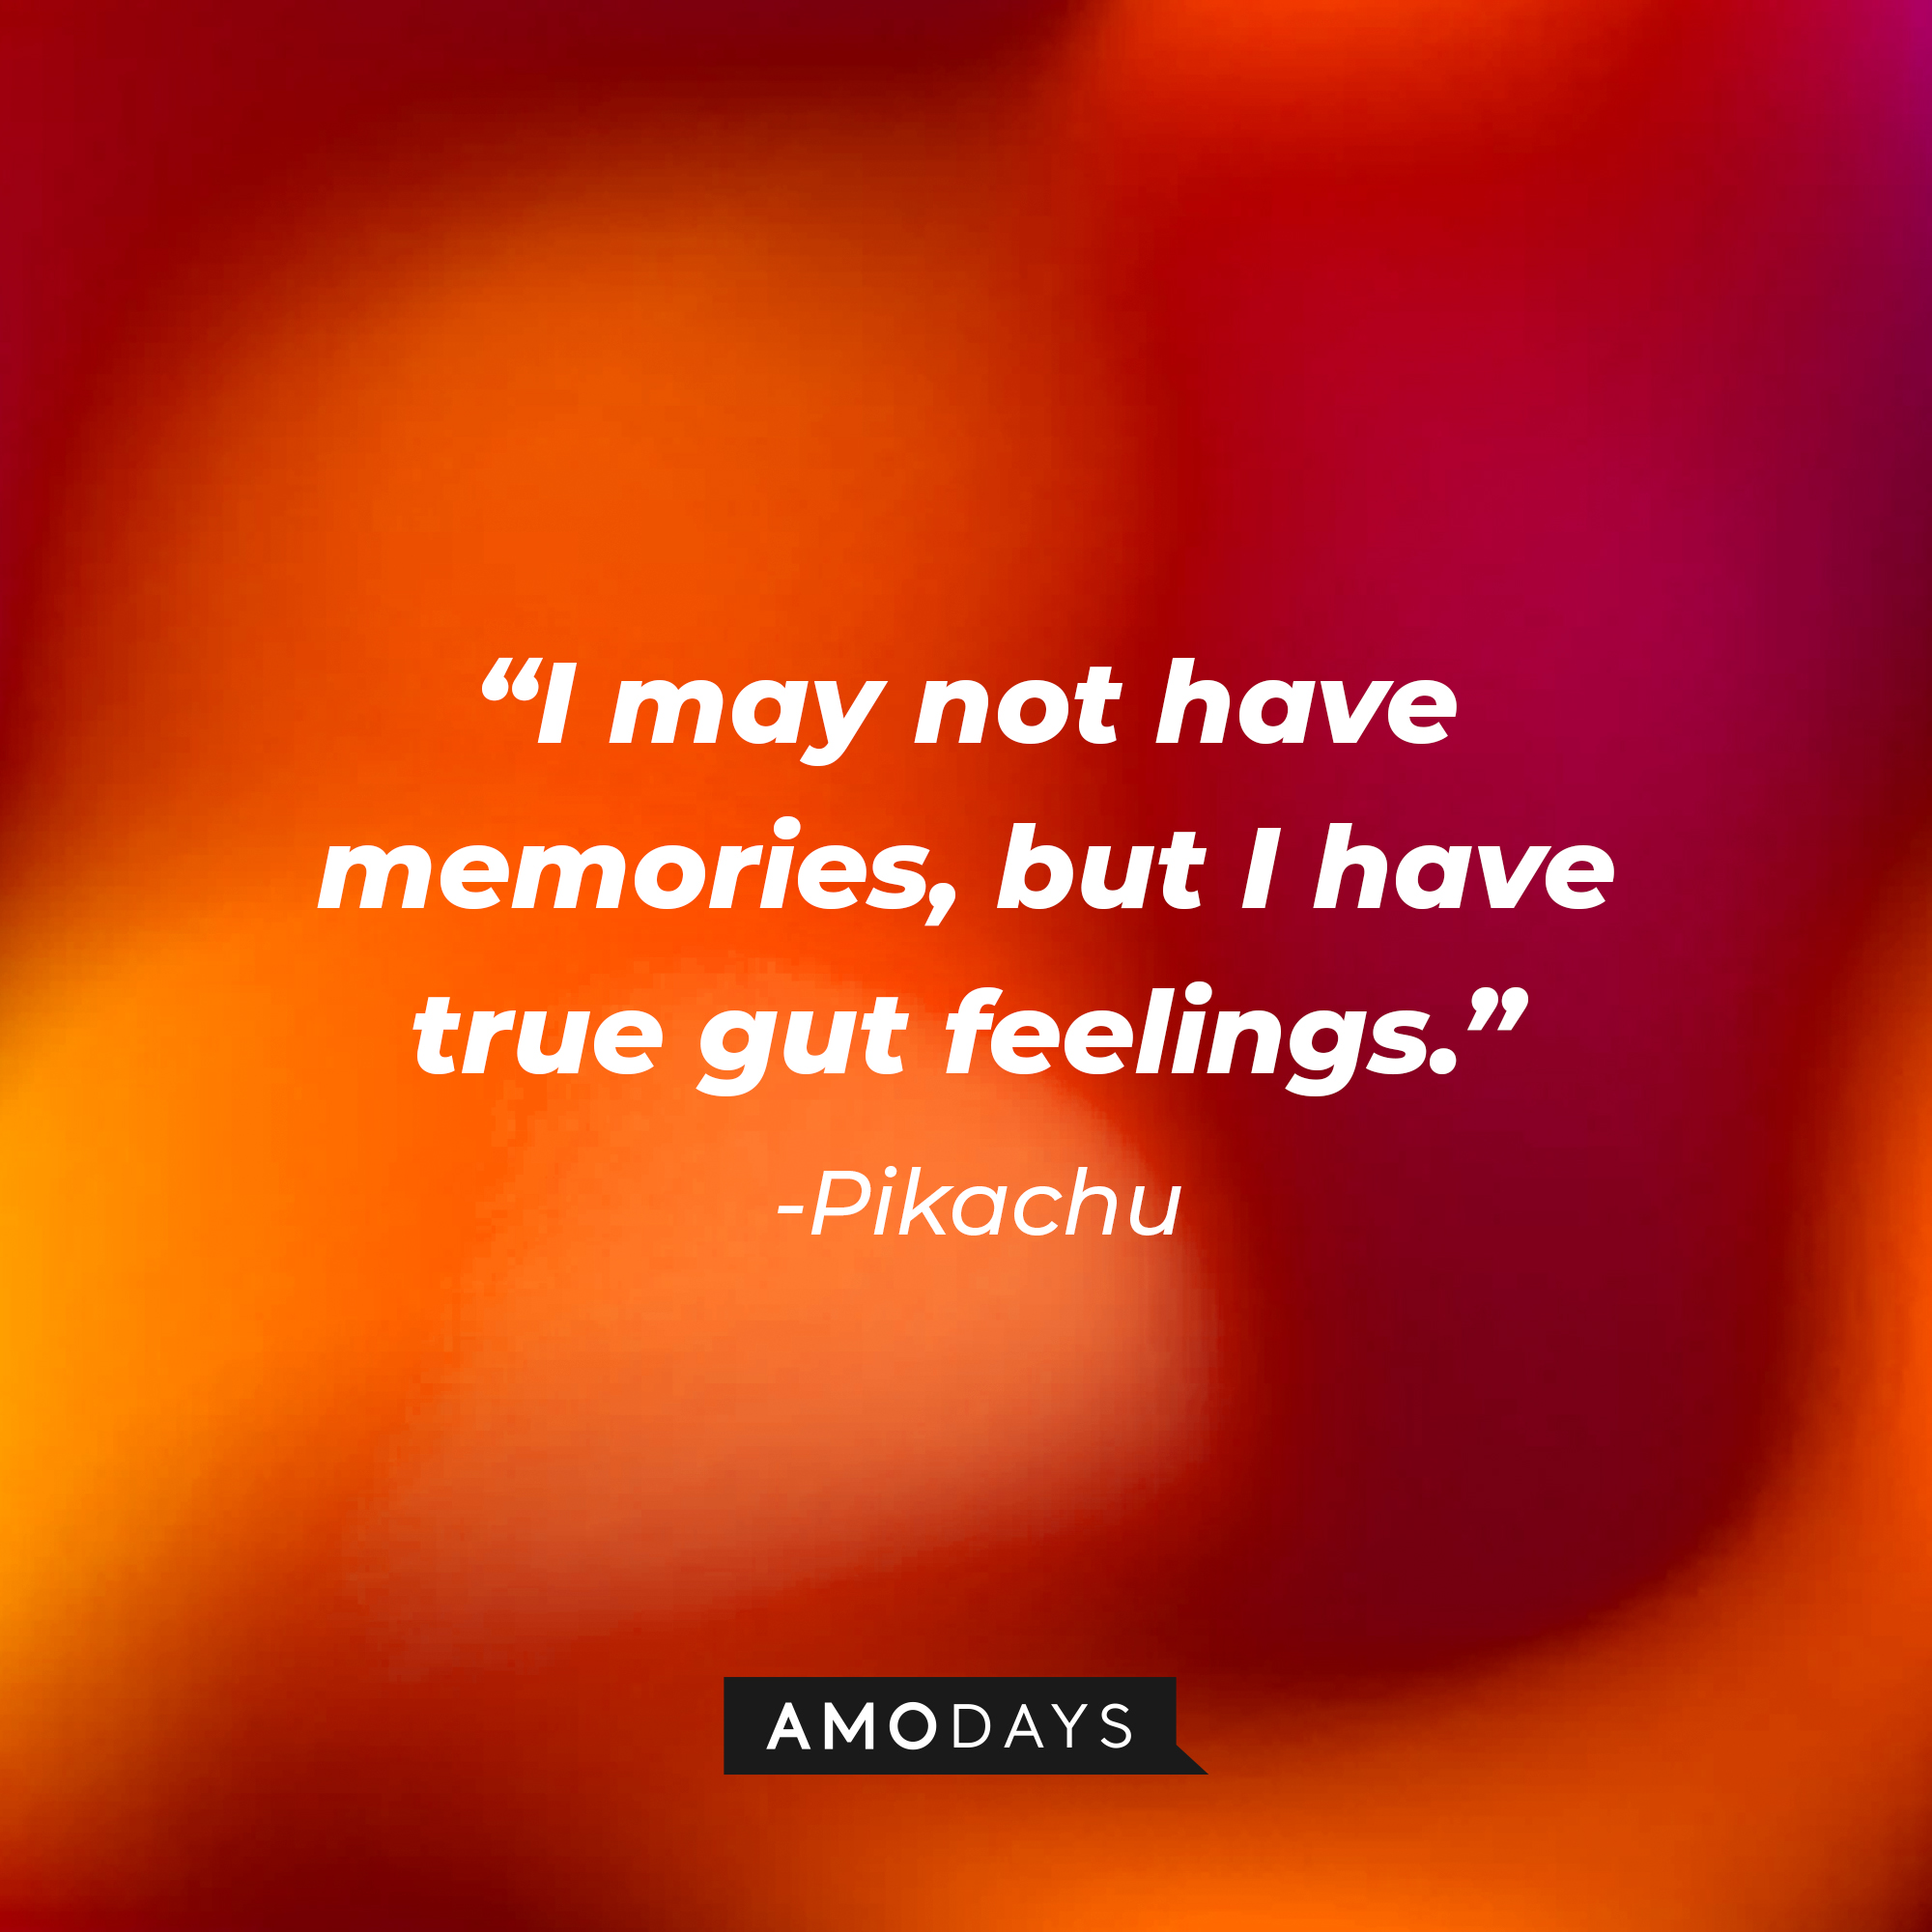 Pikachu's quote: "I may not have memories, but I have true gut feelings." | Source: AmoDays